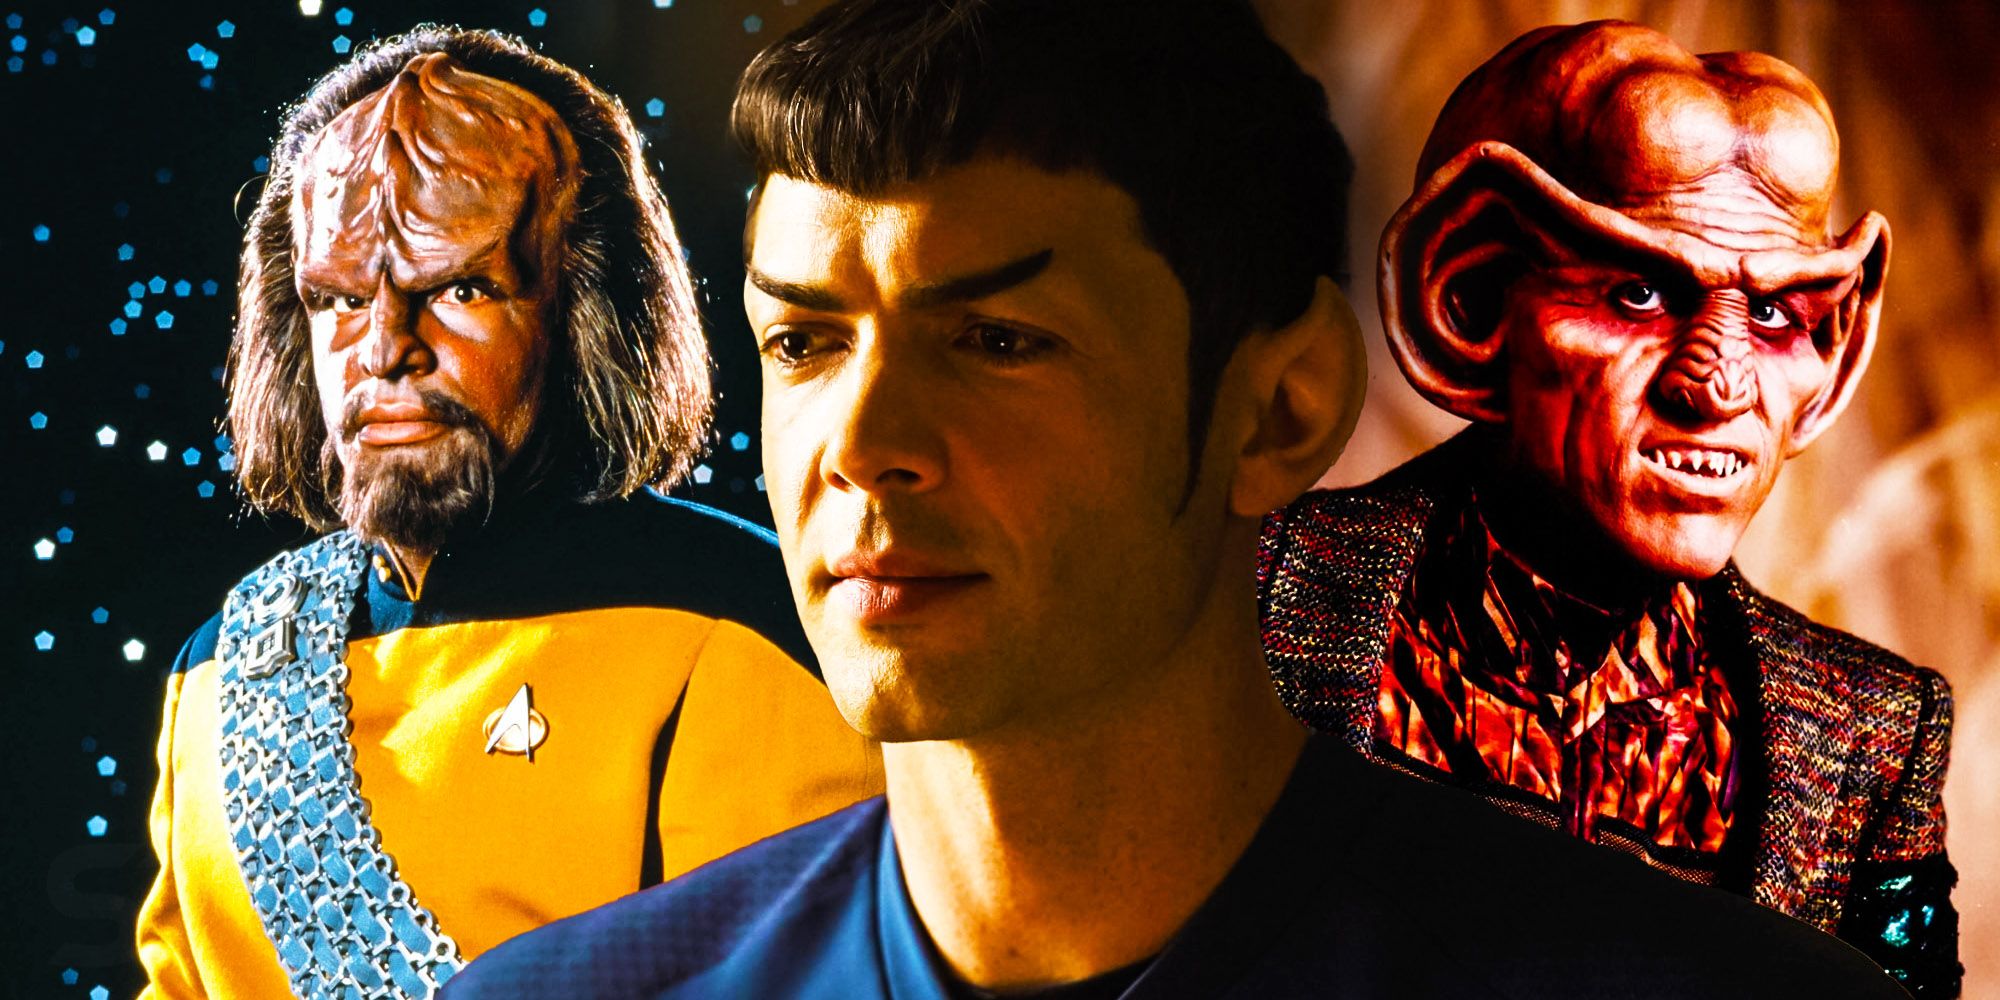 7 Star Trek Characters Who Used To Be Aliens-Of-The-Week